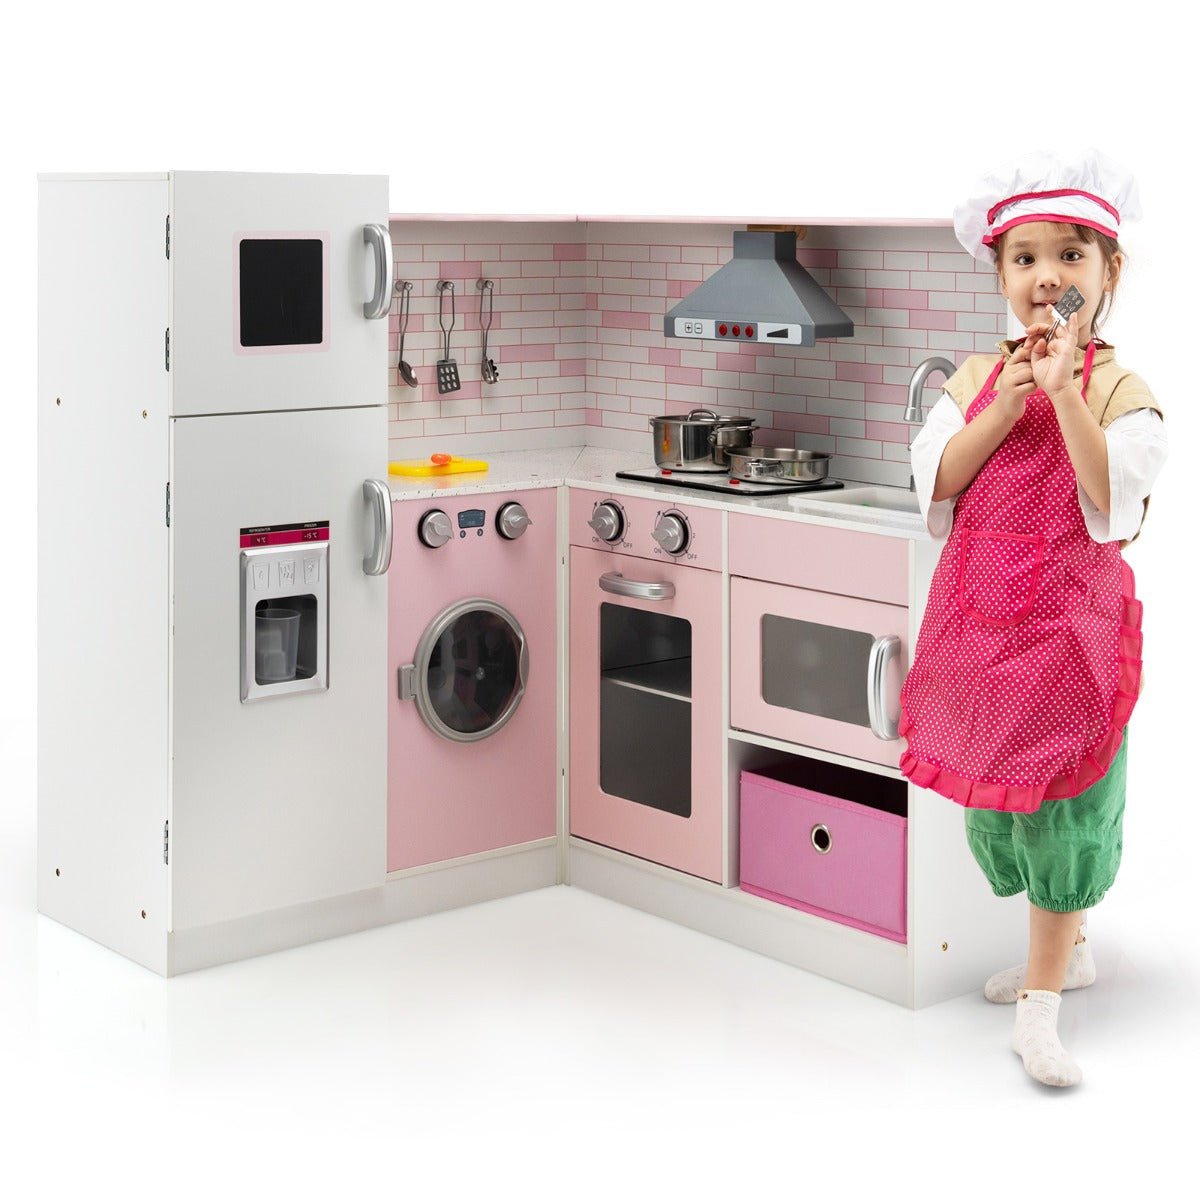 Playful Culinary Adventure: Kids Kitchen Pretend Play Set with Cookware & Apron